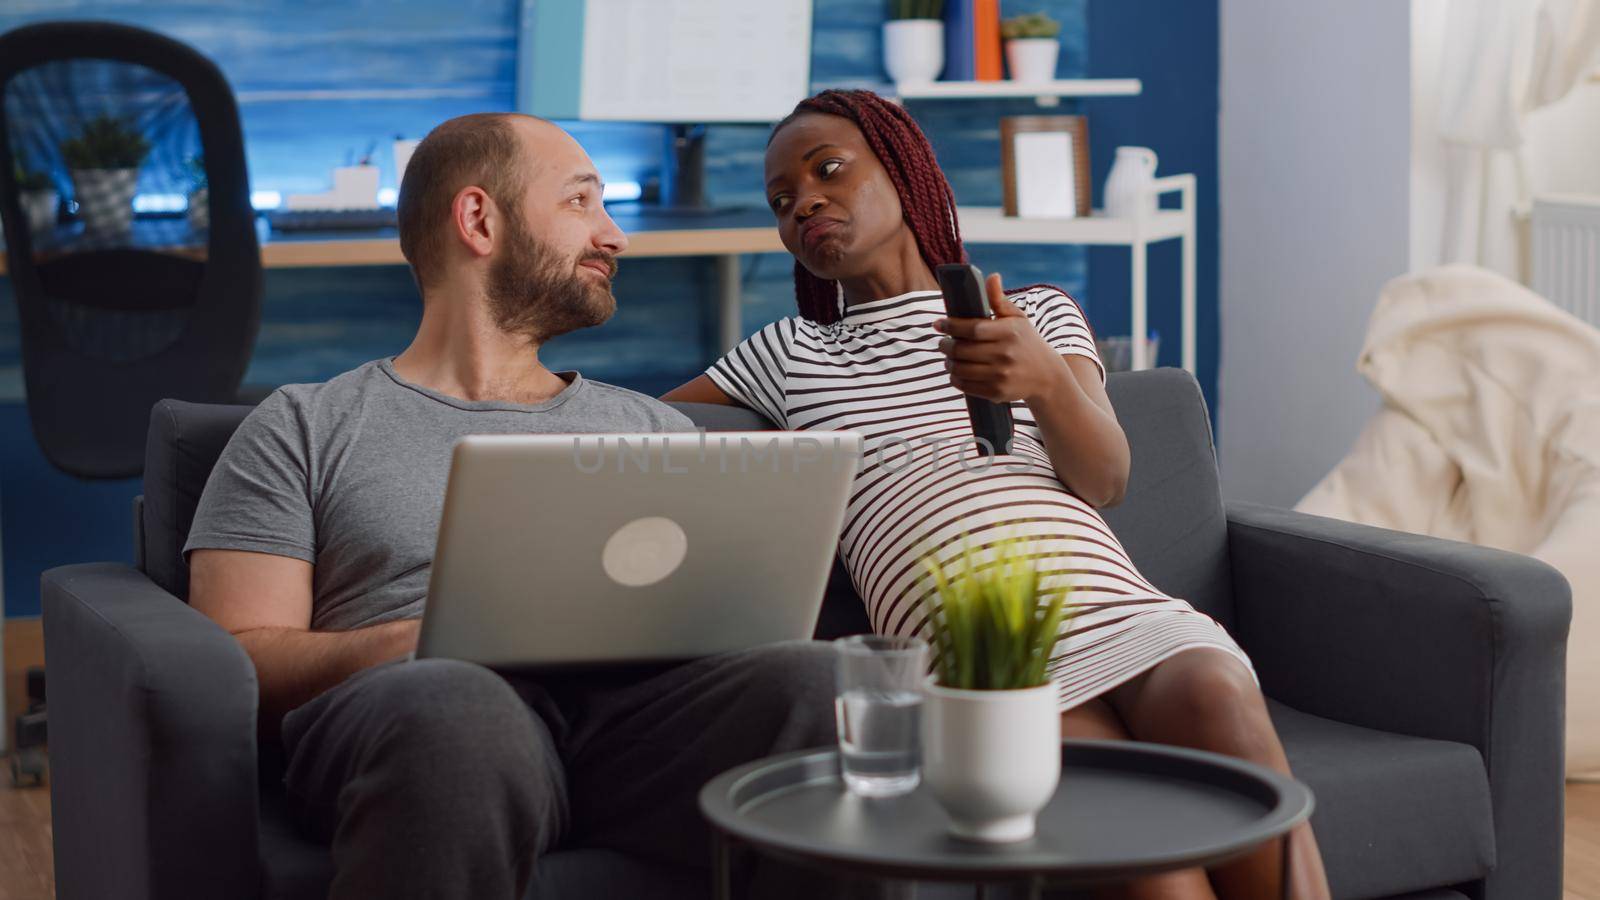 Married interracial couple talking about pregnancy while relaxing together in living room. Multi ethnic people using laptop and watching television. Black woman holding TV remote control